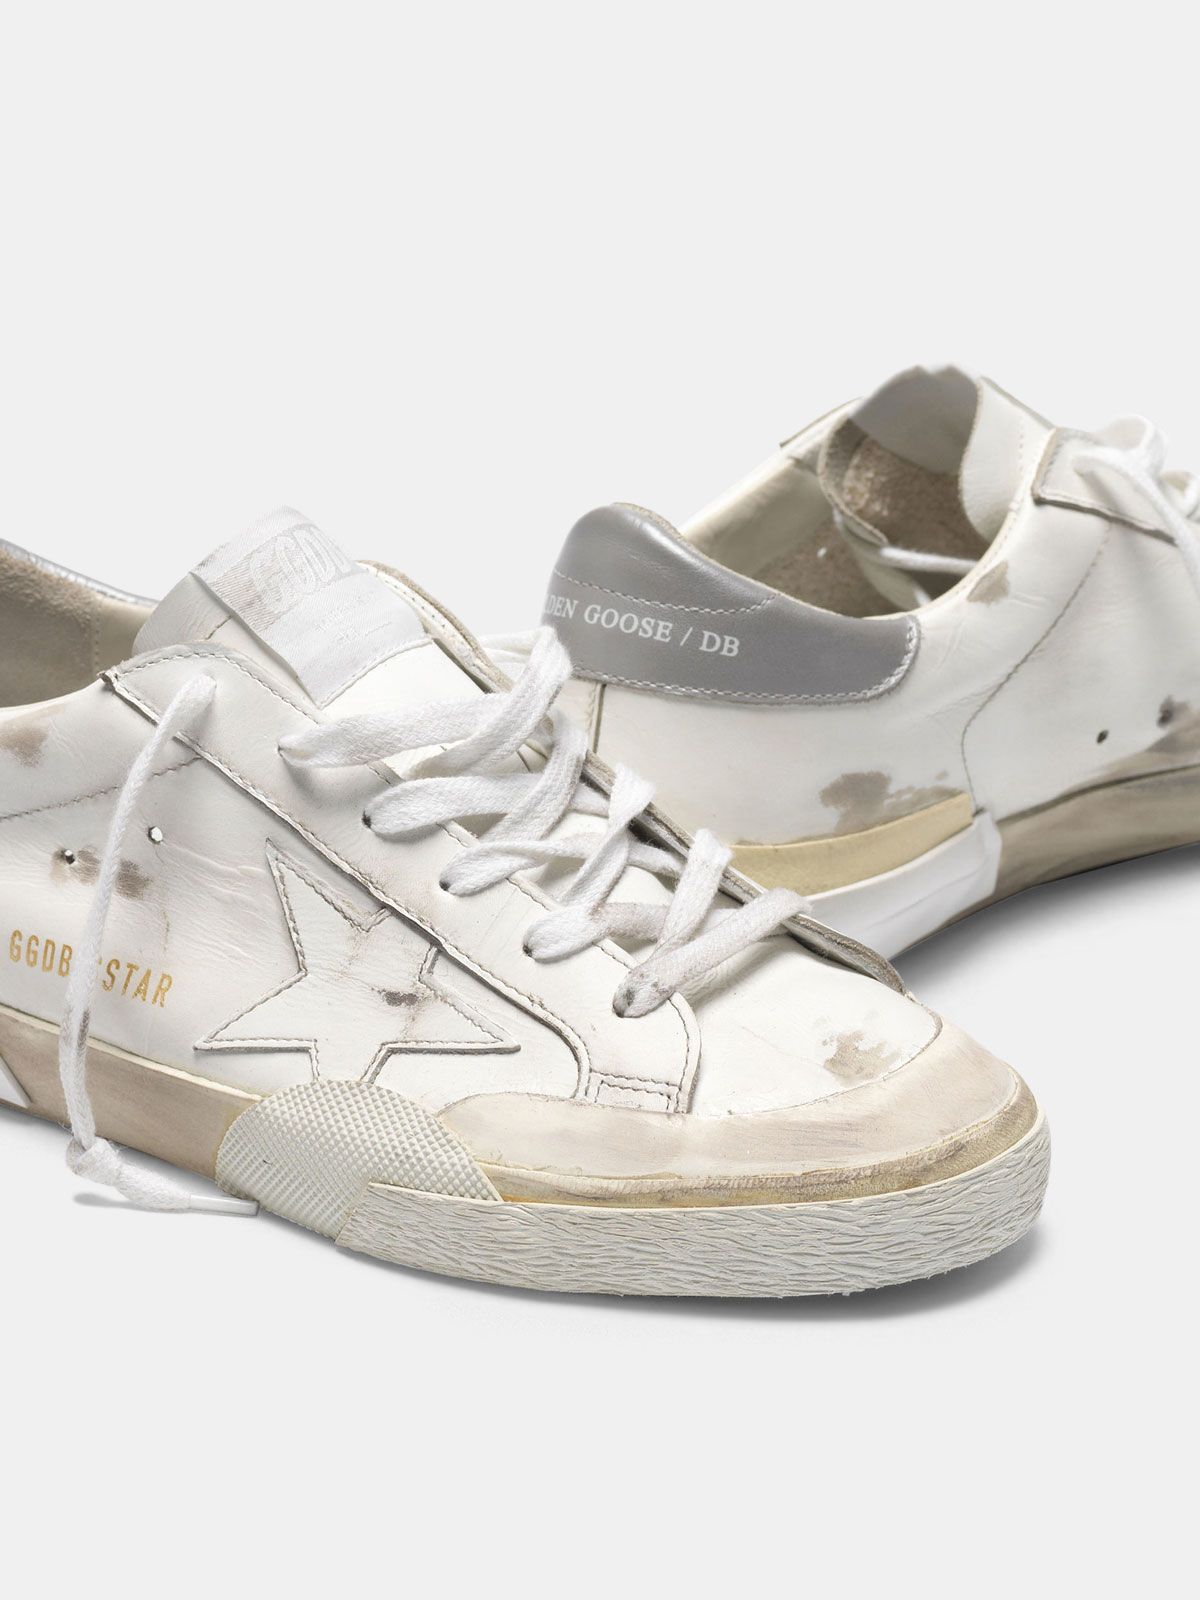 Patchwork Super-Star sneakers with multi-foxing technique | Golden Goose